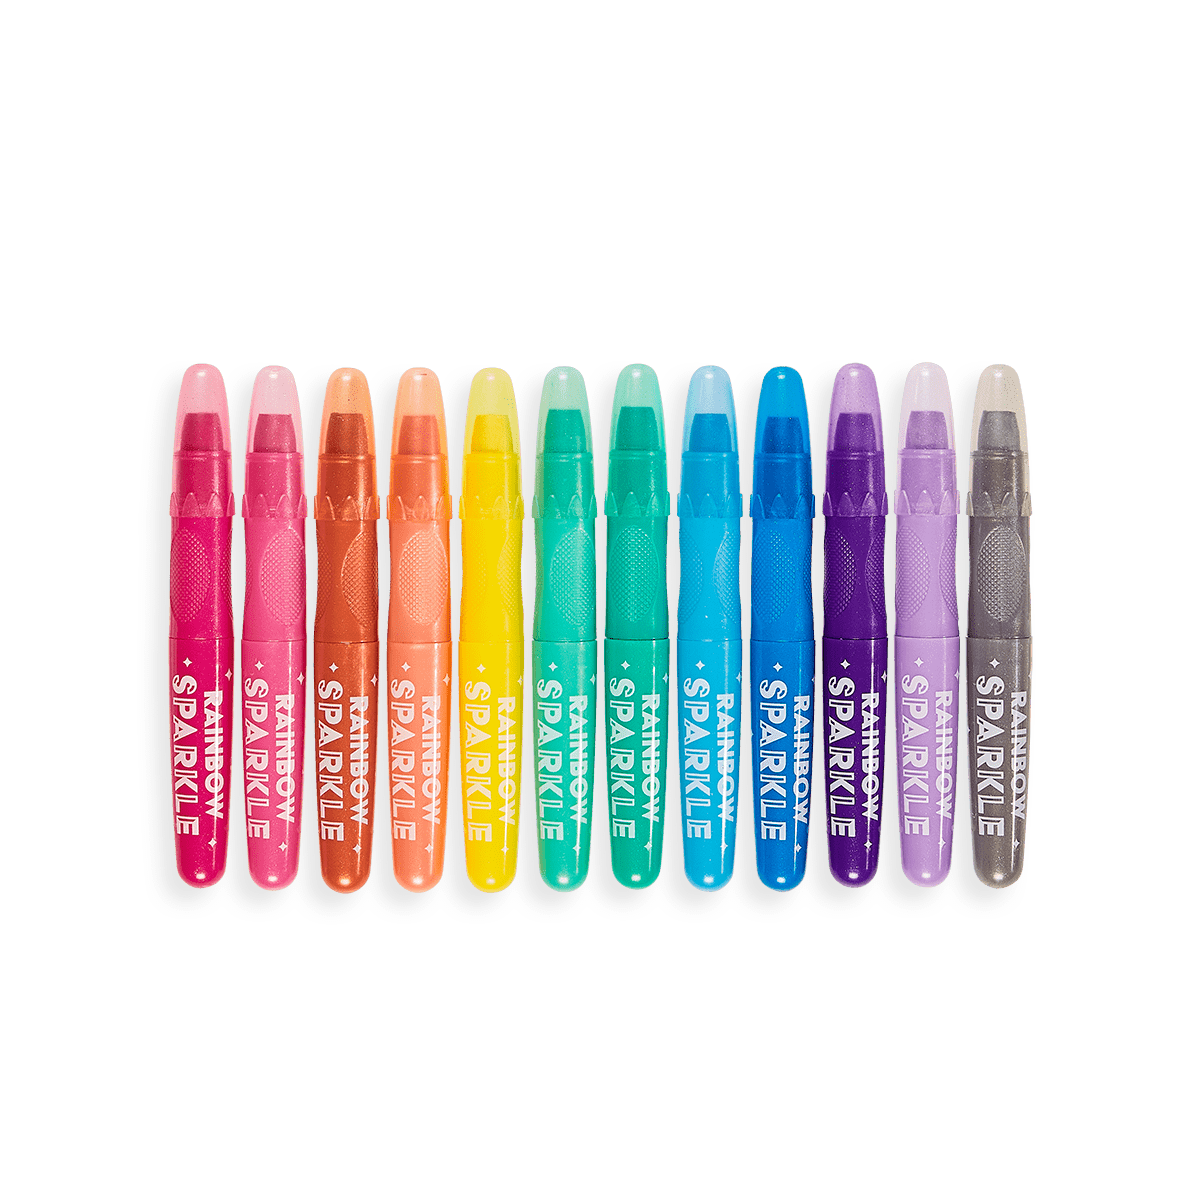 OOLY Rainbow Sparkle Watercolor Gel Crayons by OOLY